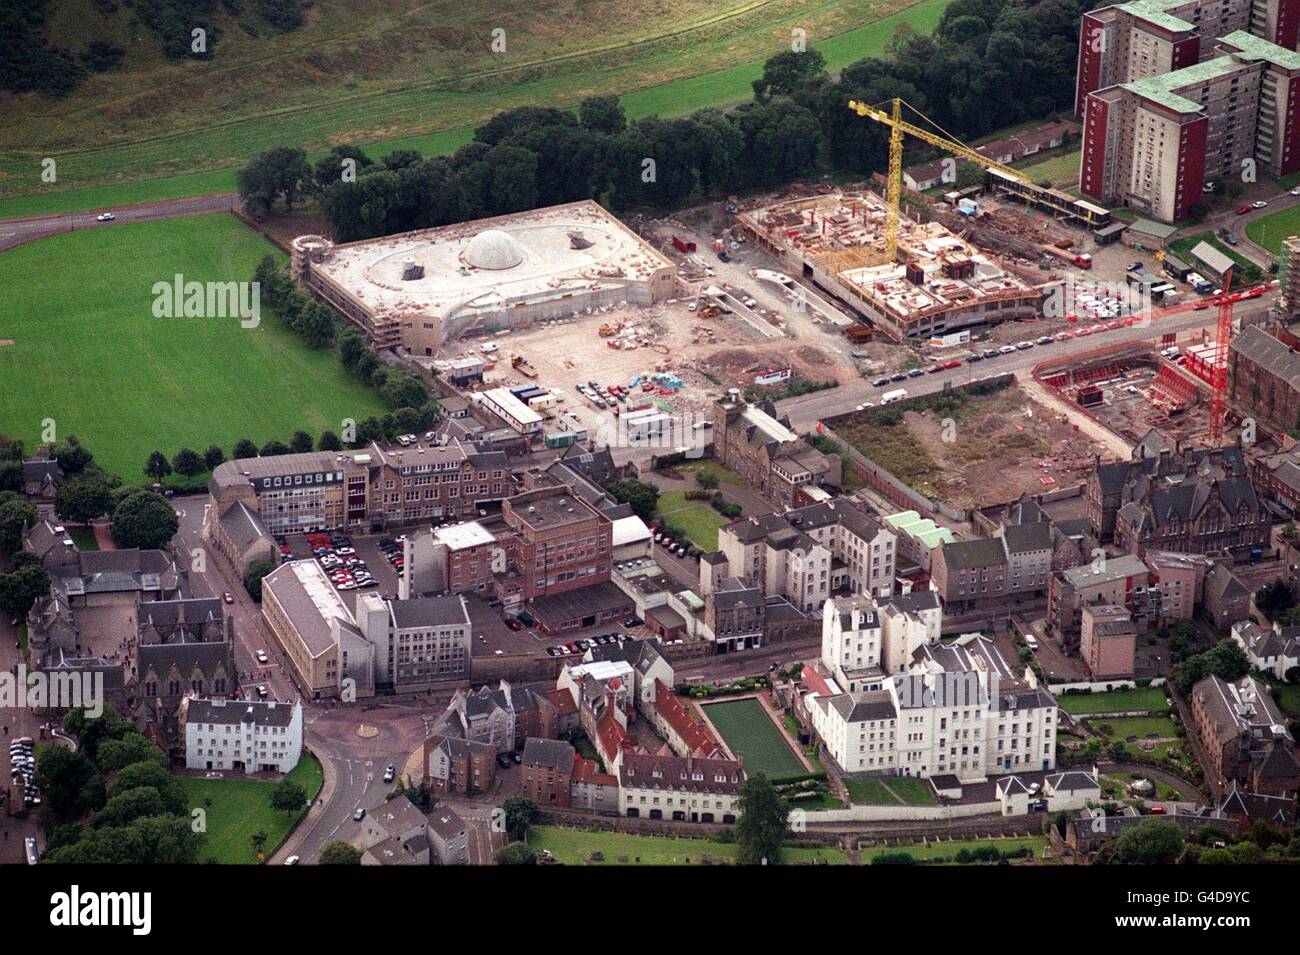 PA NEWS 20/8/98 AERIAL VIEW OF THE EDINBURGH SITE WHERE THE NEW SCOTTISH PARLIAMENT BUILDING WILL BE LOCATED. Stock Photo